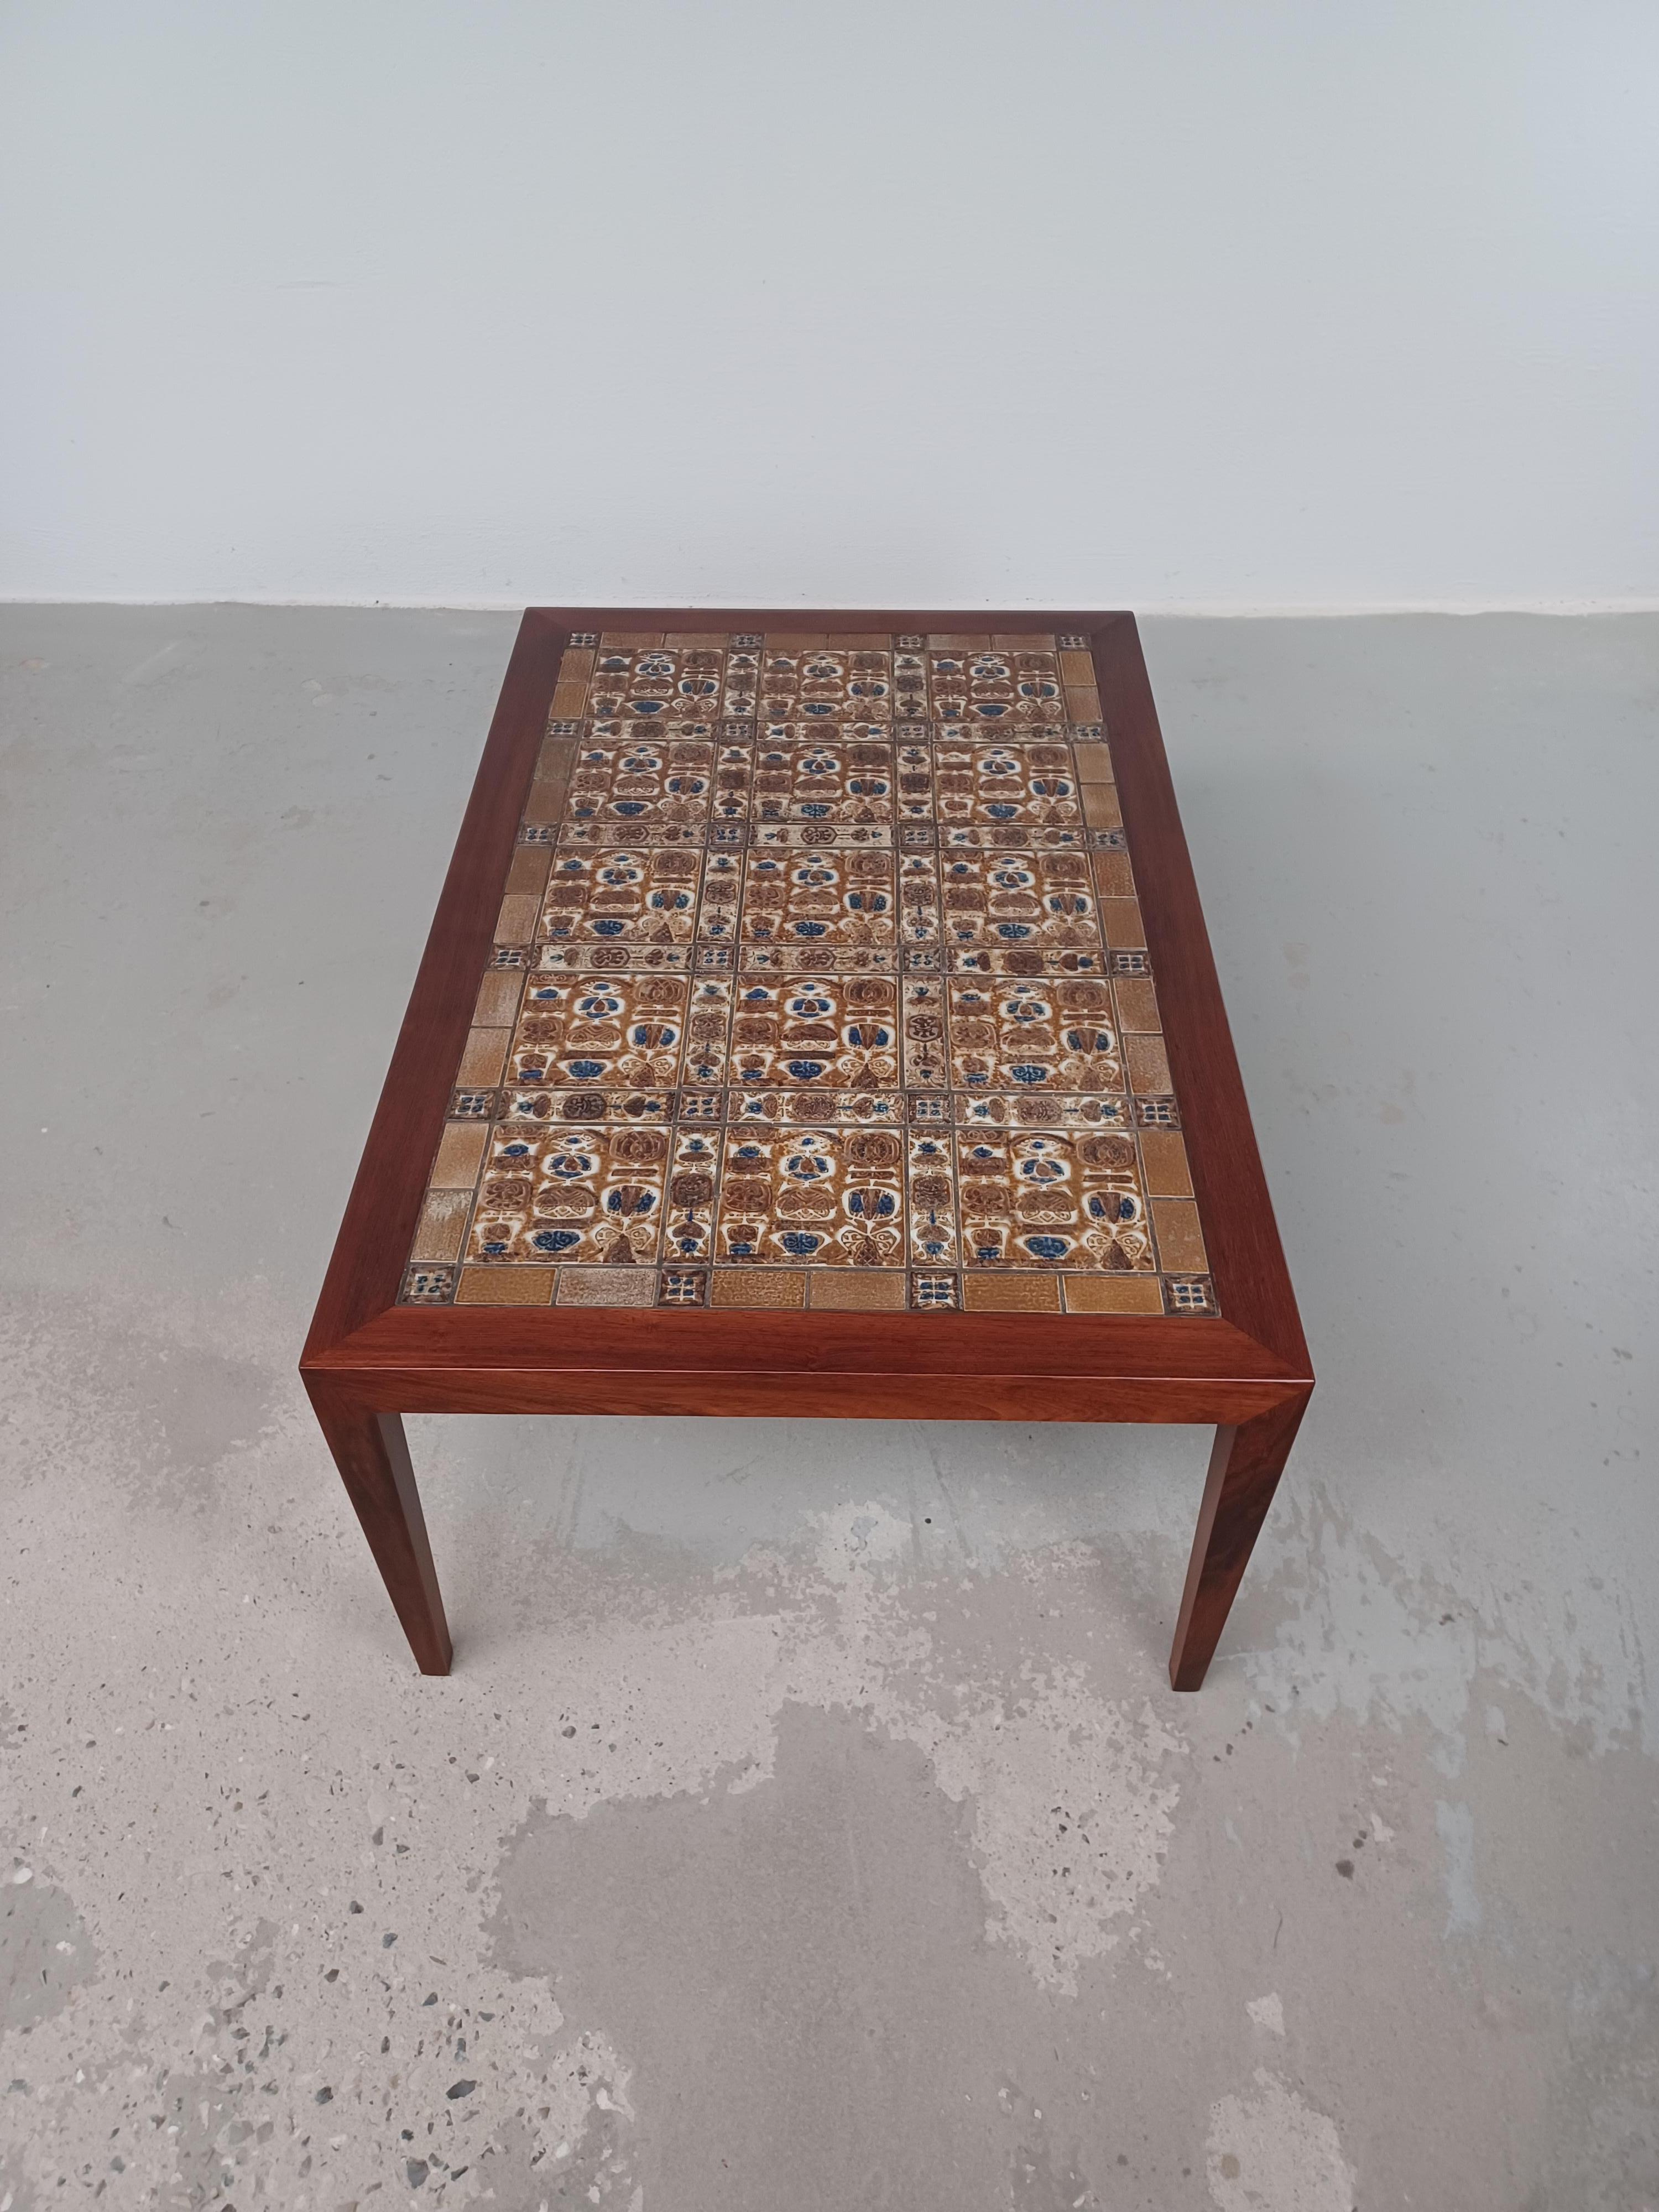 Rosewood Coffee table designed by Severin Hansen for Haslev Møbelsnedkeri with Niels Thorsson tiles made by Royal Copenhagen, Denmark.

The Coffee table with it's signature corner joints often used by Severin hansen and it's 1960's / 1970's colored